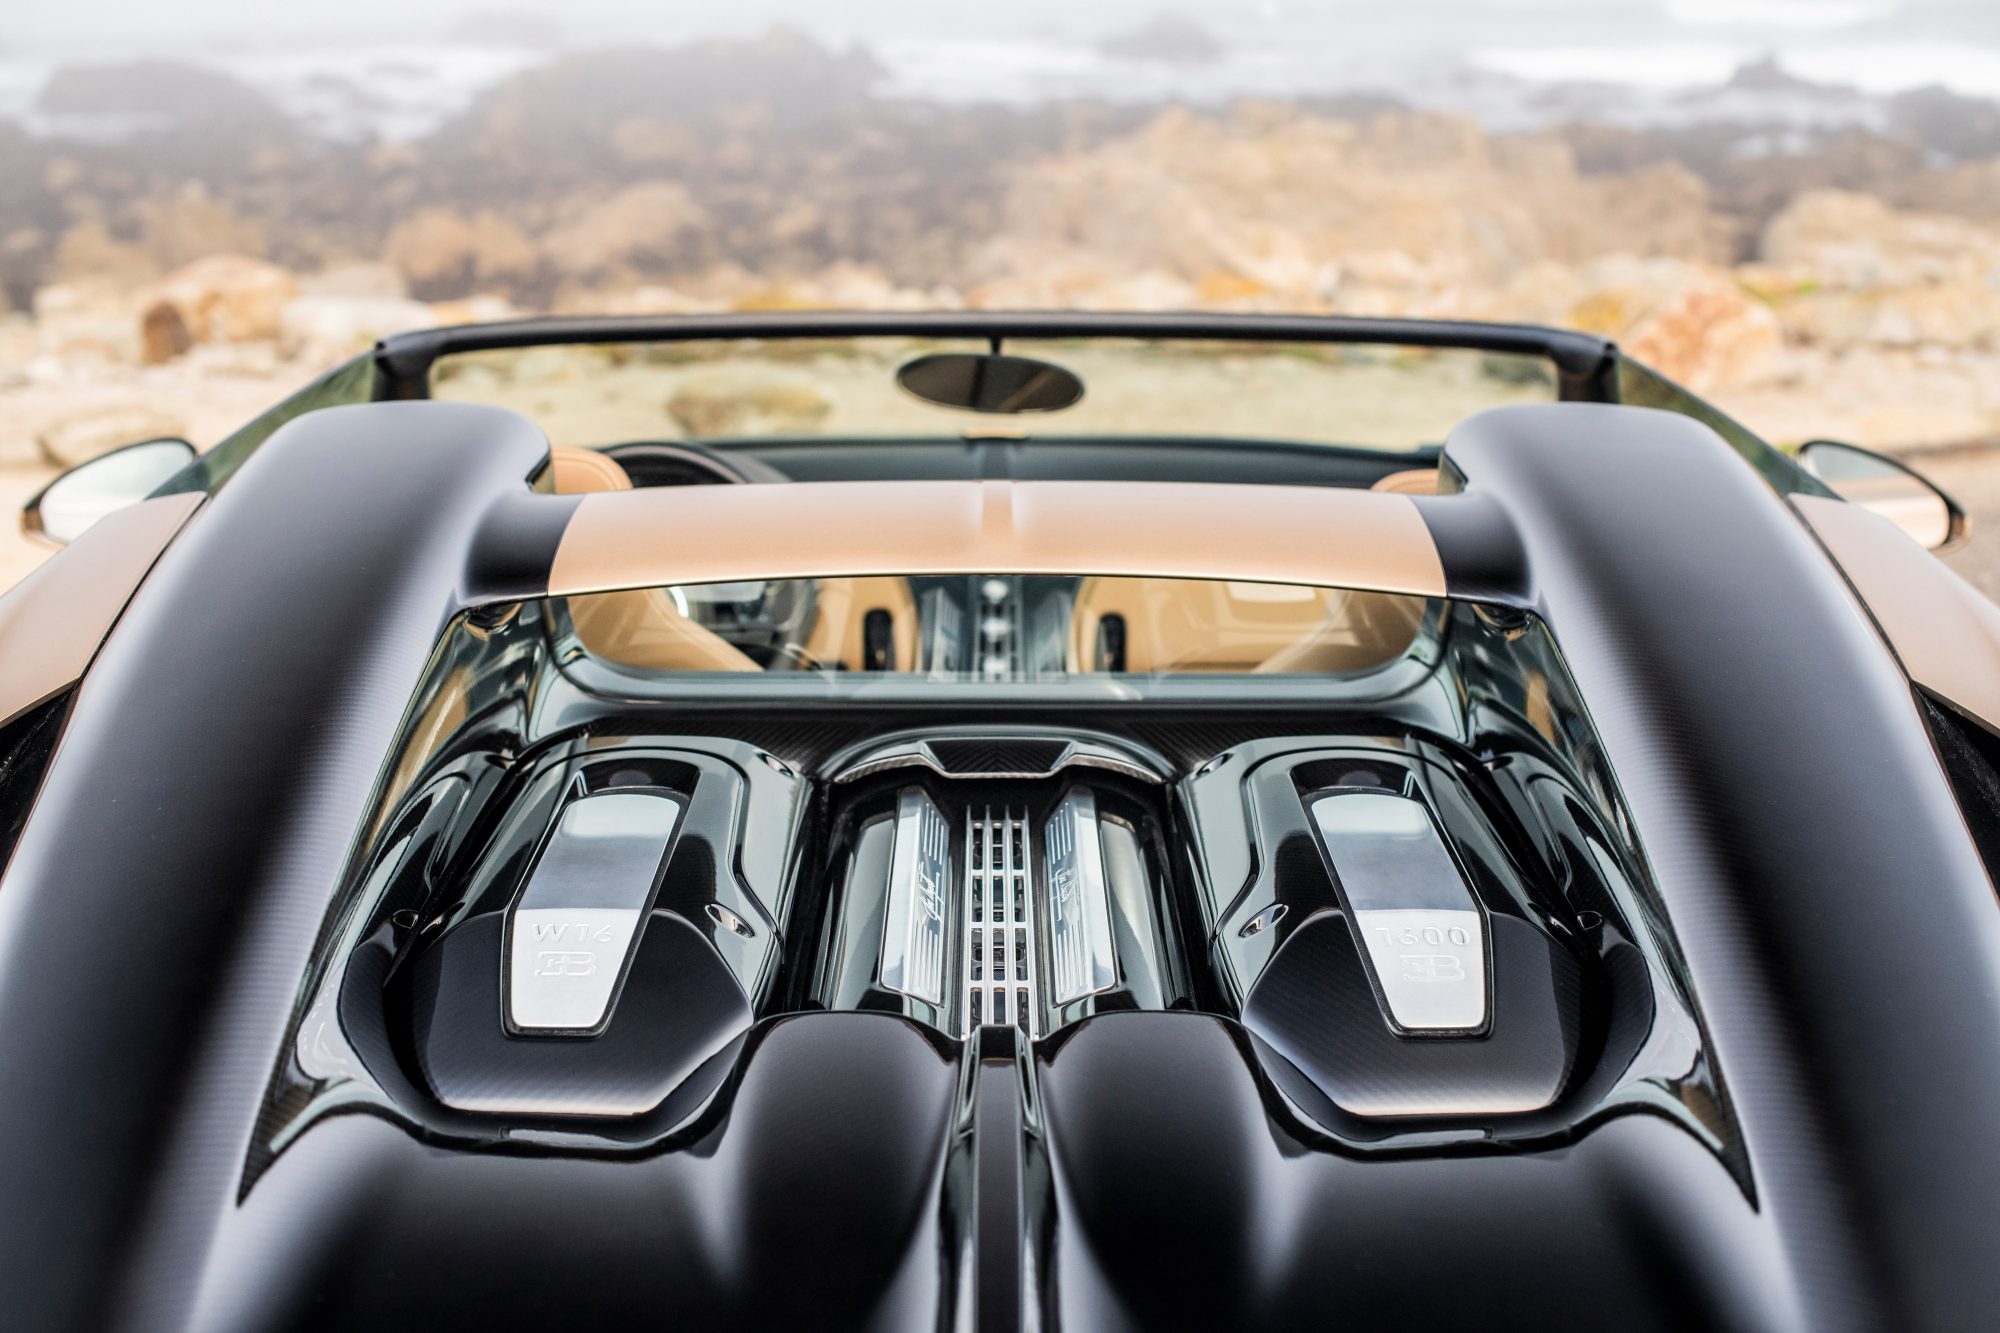 W16 Mistral: The art of bringing Bugatti’s ultimate roadster to life